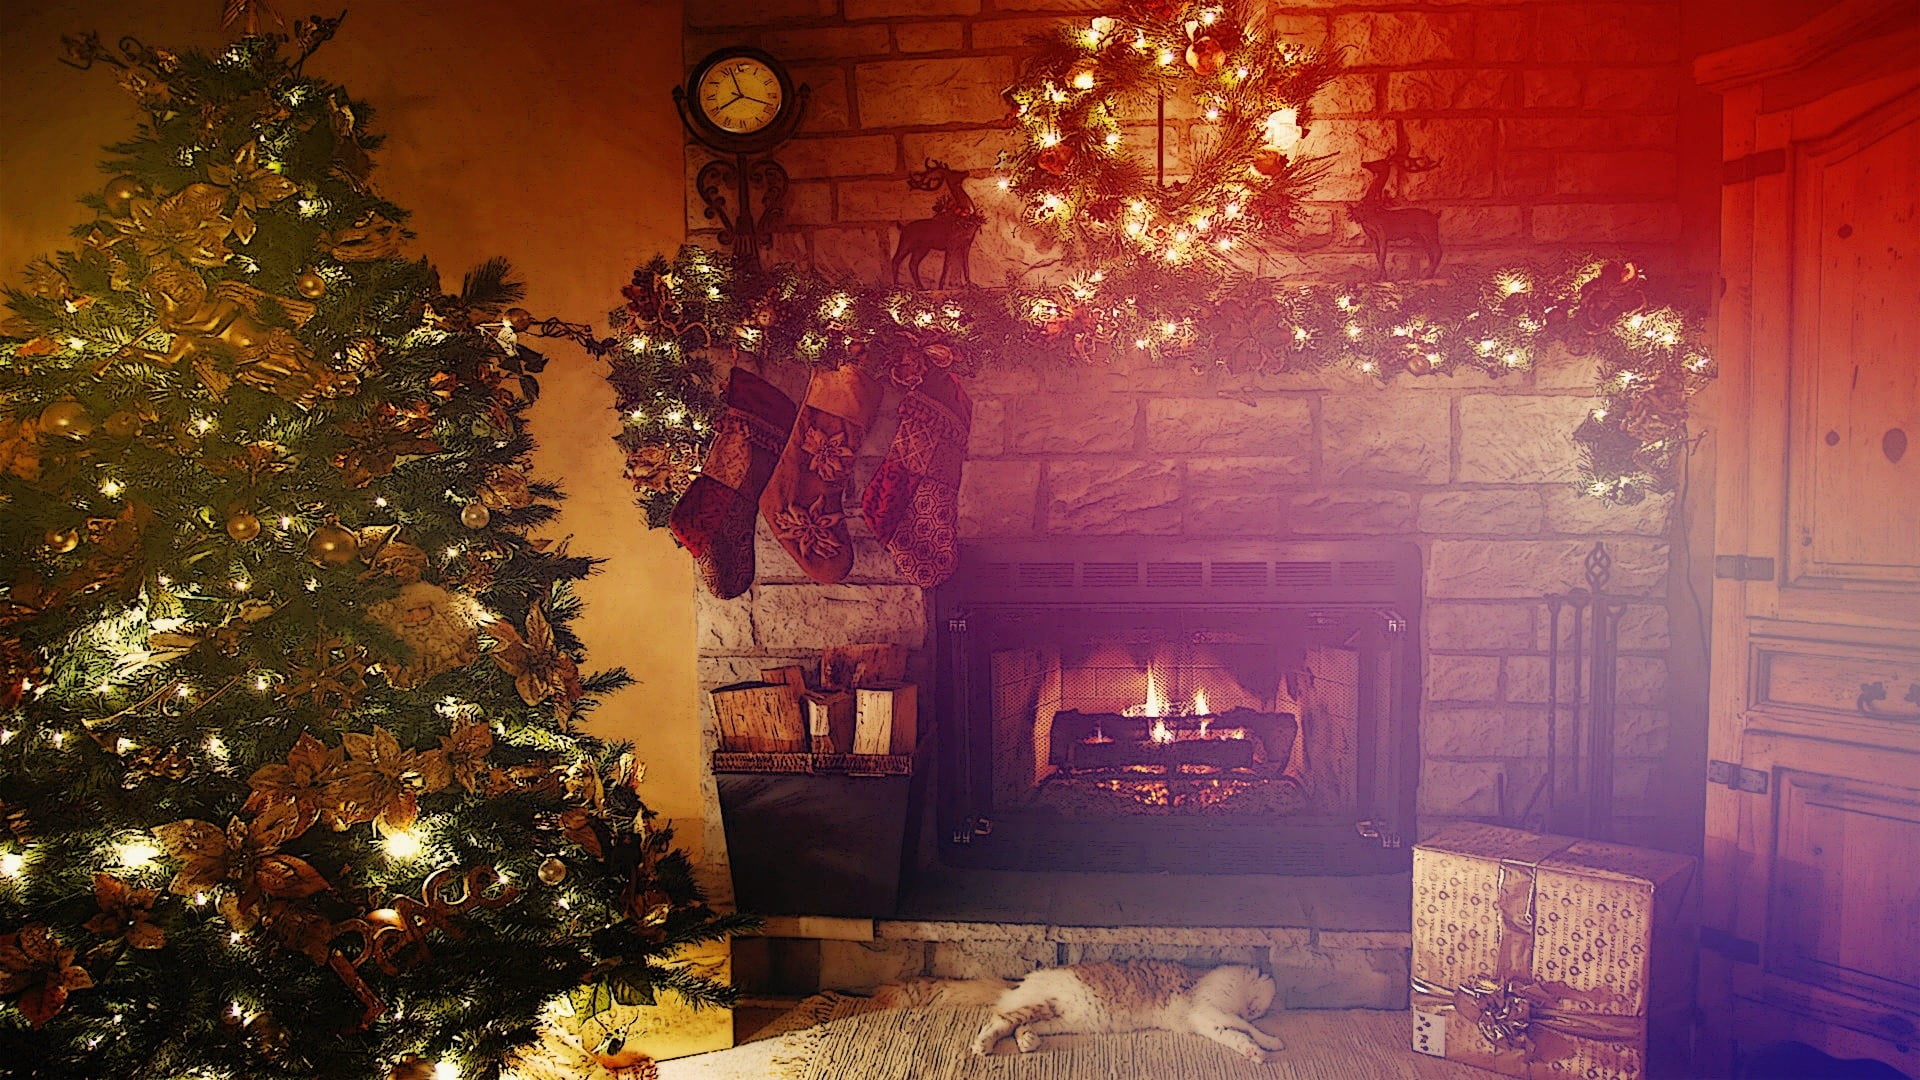 Christmas Tree And Dog By Fireplace - HD Wallpaper 